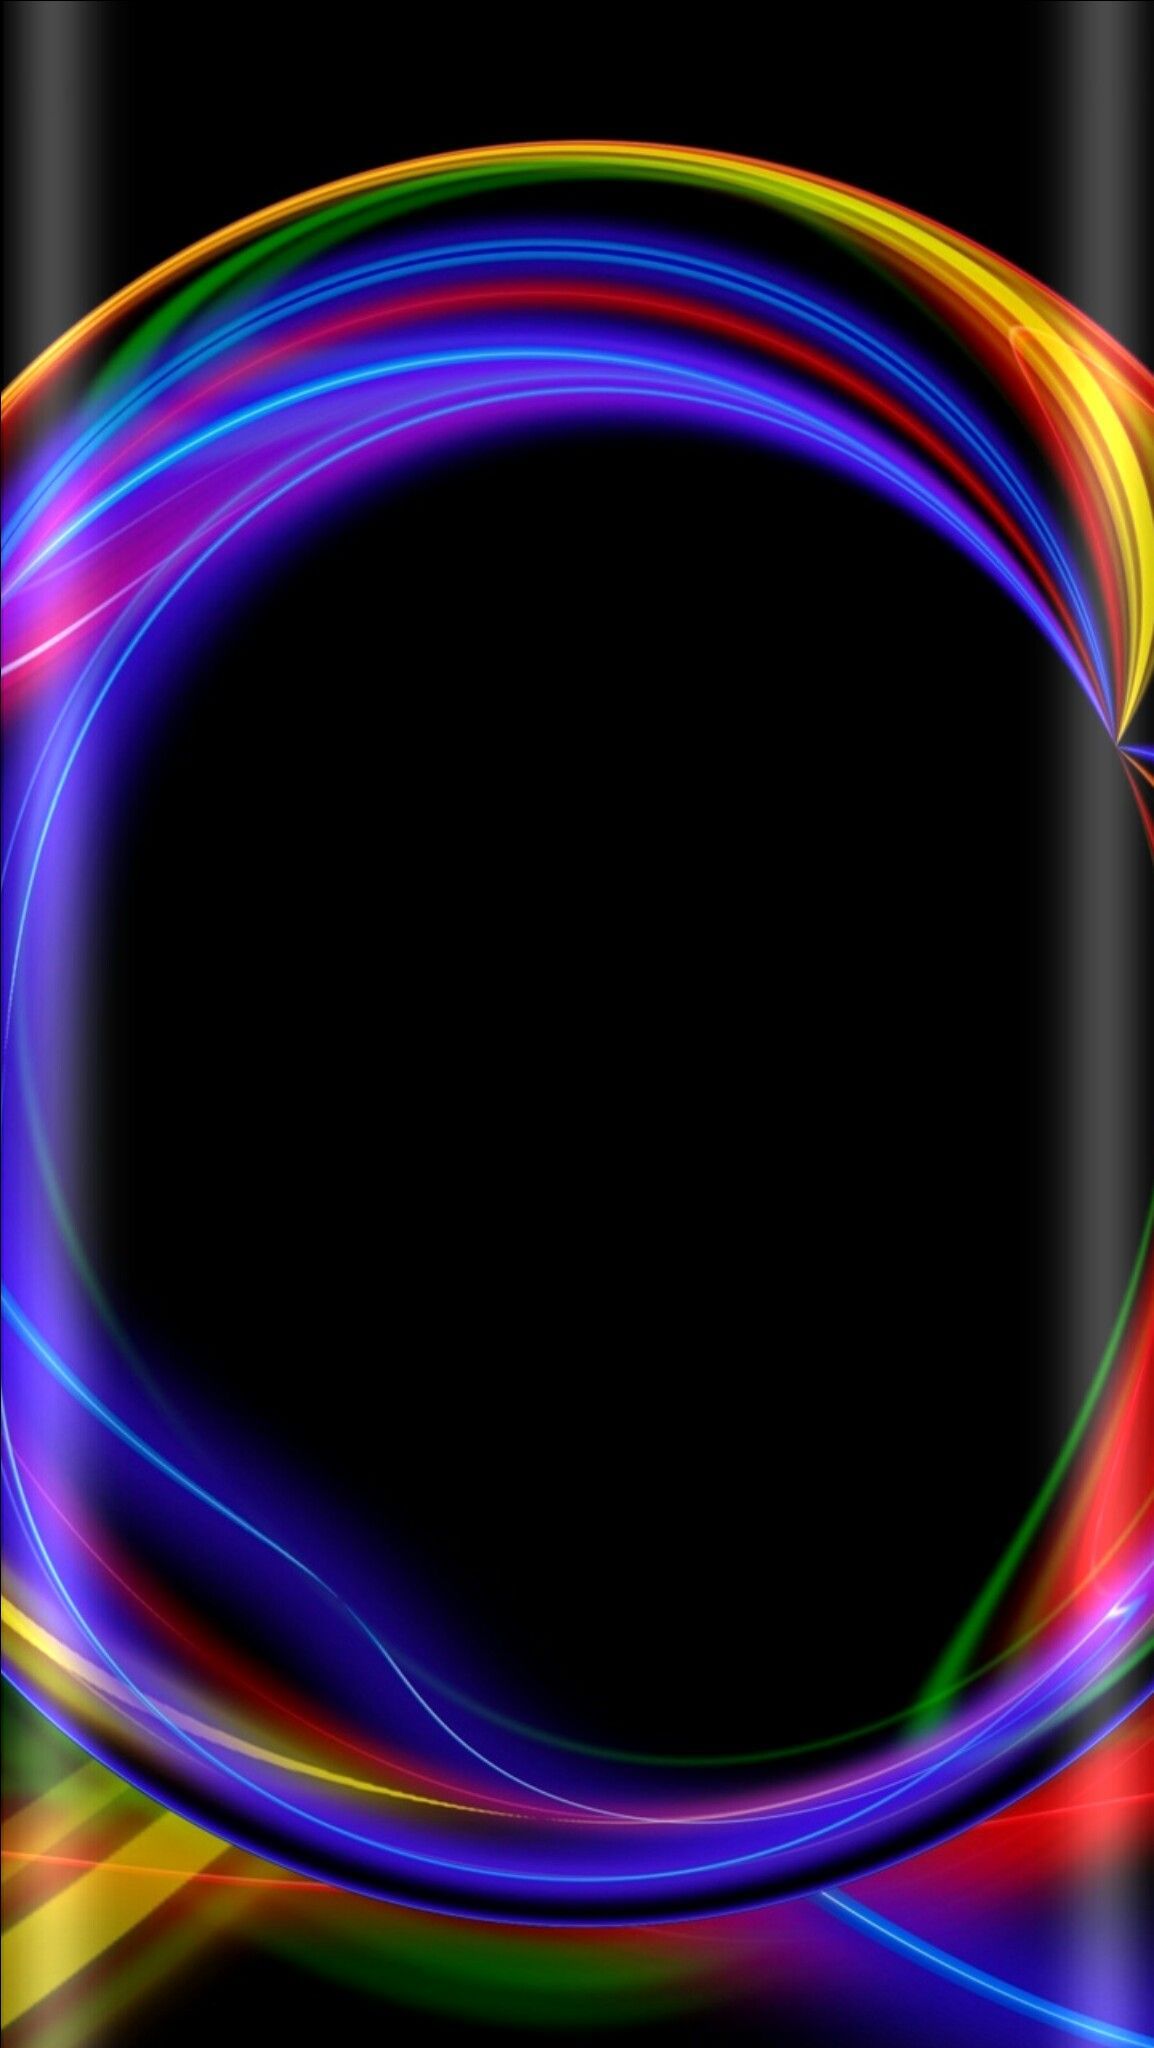 Black with Neon Abstract Wallpaper. Abstract wallpaper, Cellphone